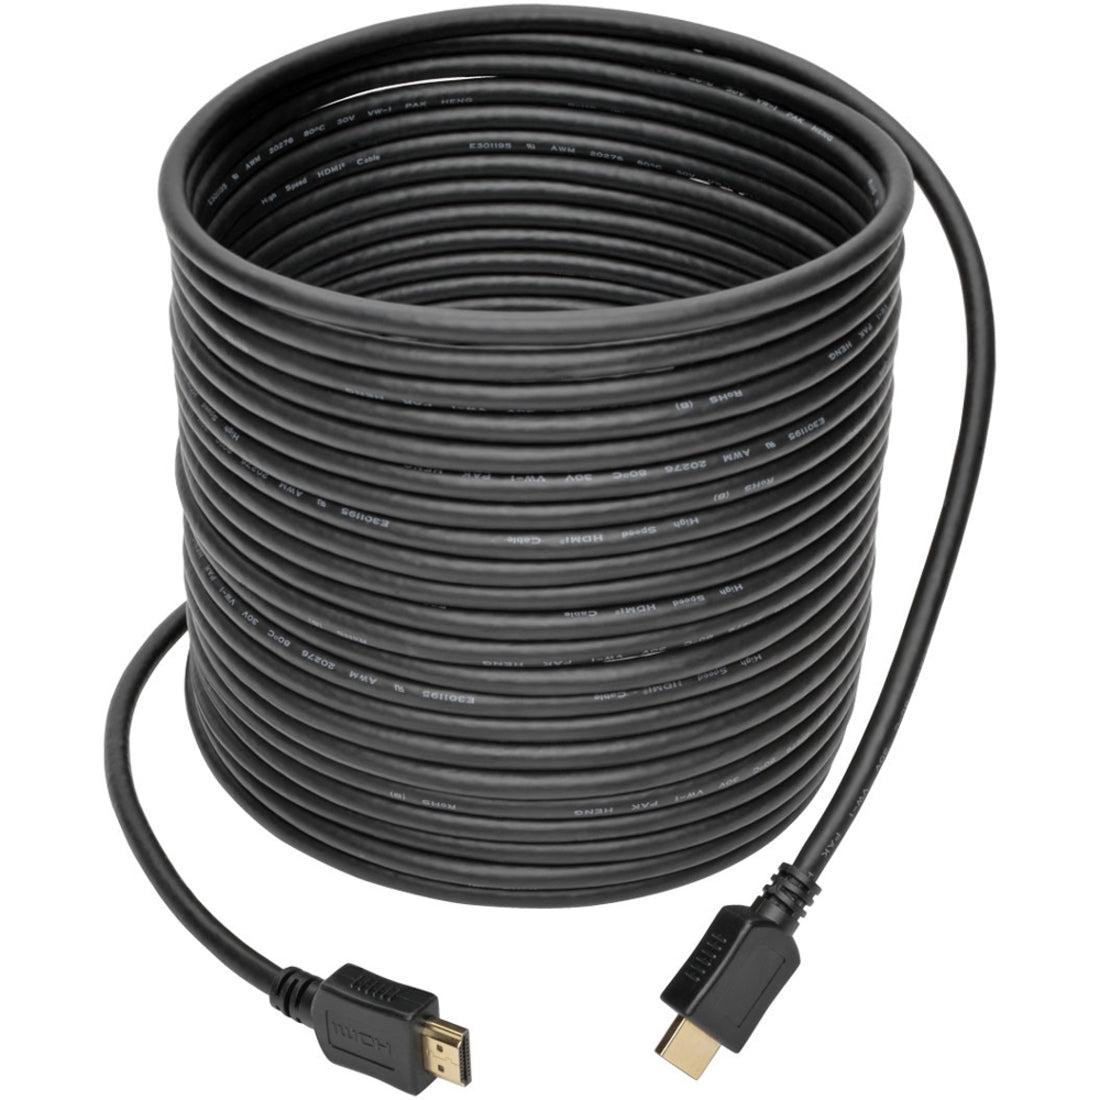 Tripp Lite P568-040 High-Speed HDMI Cable, Ultra HD 40-ft., Black, Flexible, EMI/RF Protection